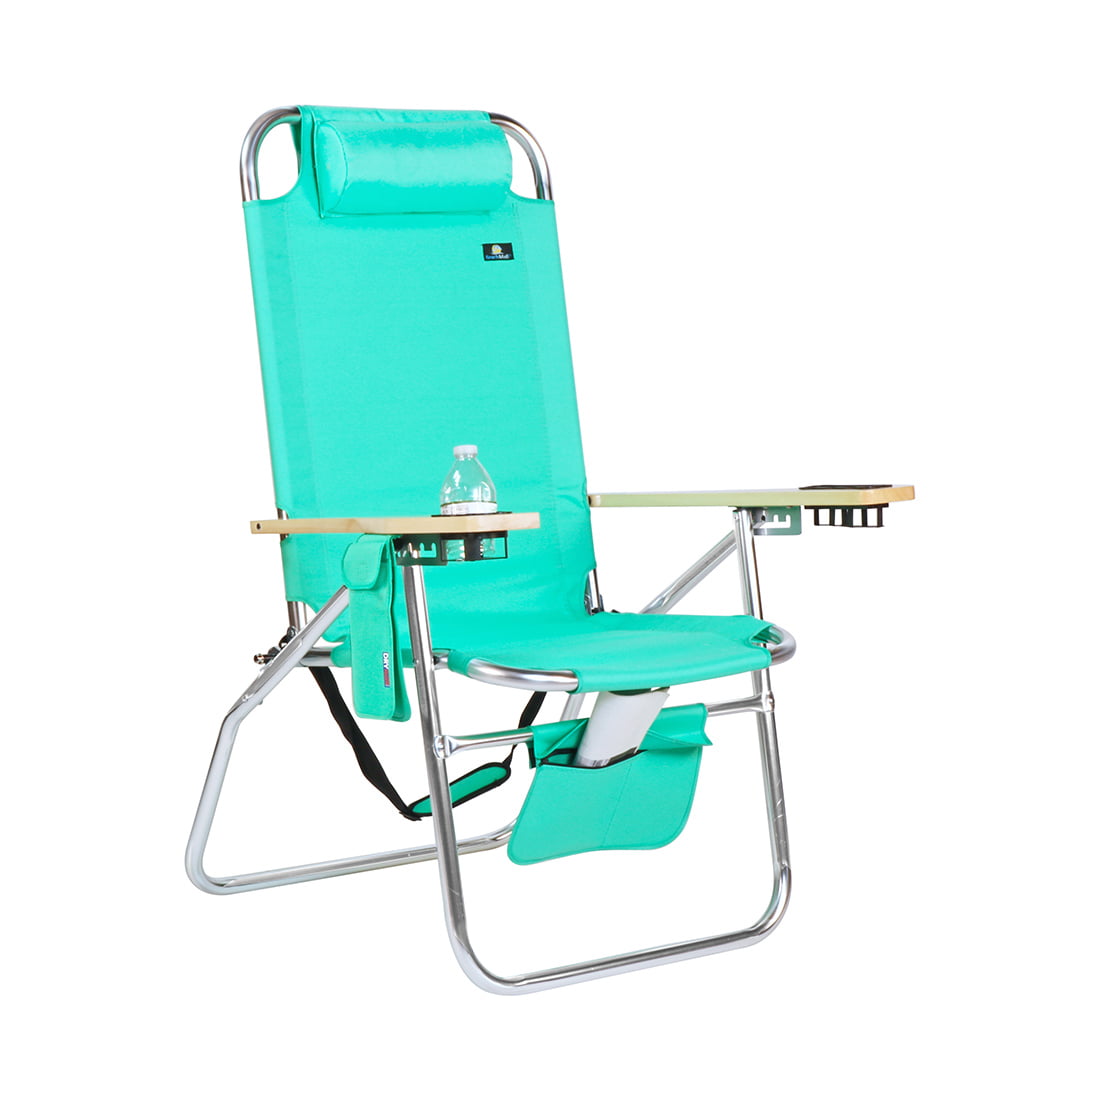 Simple Beach Chair Size with Simple Decor